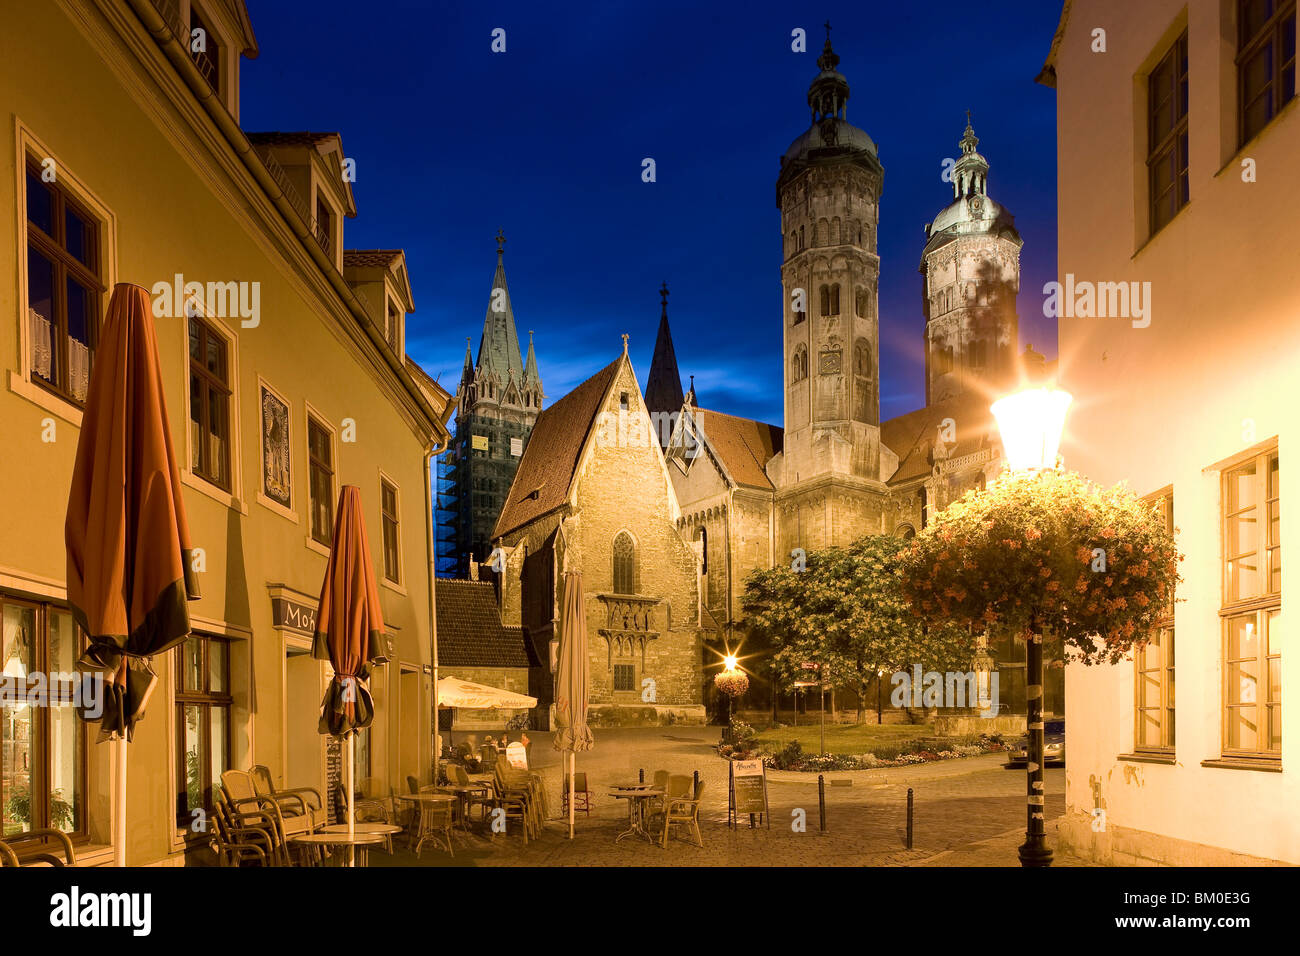 Naumburg cathedral St. Peter and Paul, Naumburg an der Saale, Saxony-Anhalt, Germany, Europe Stock Photo